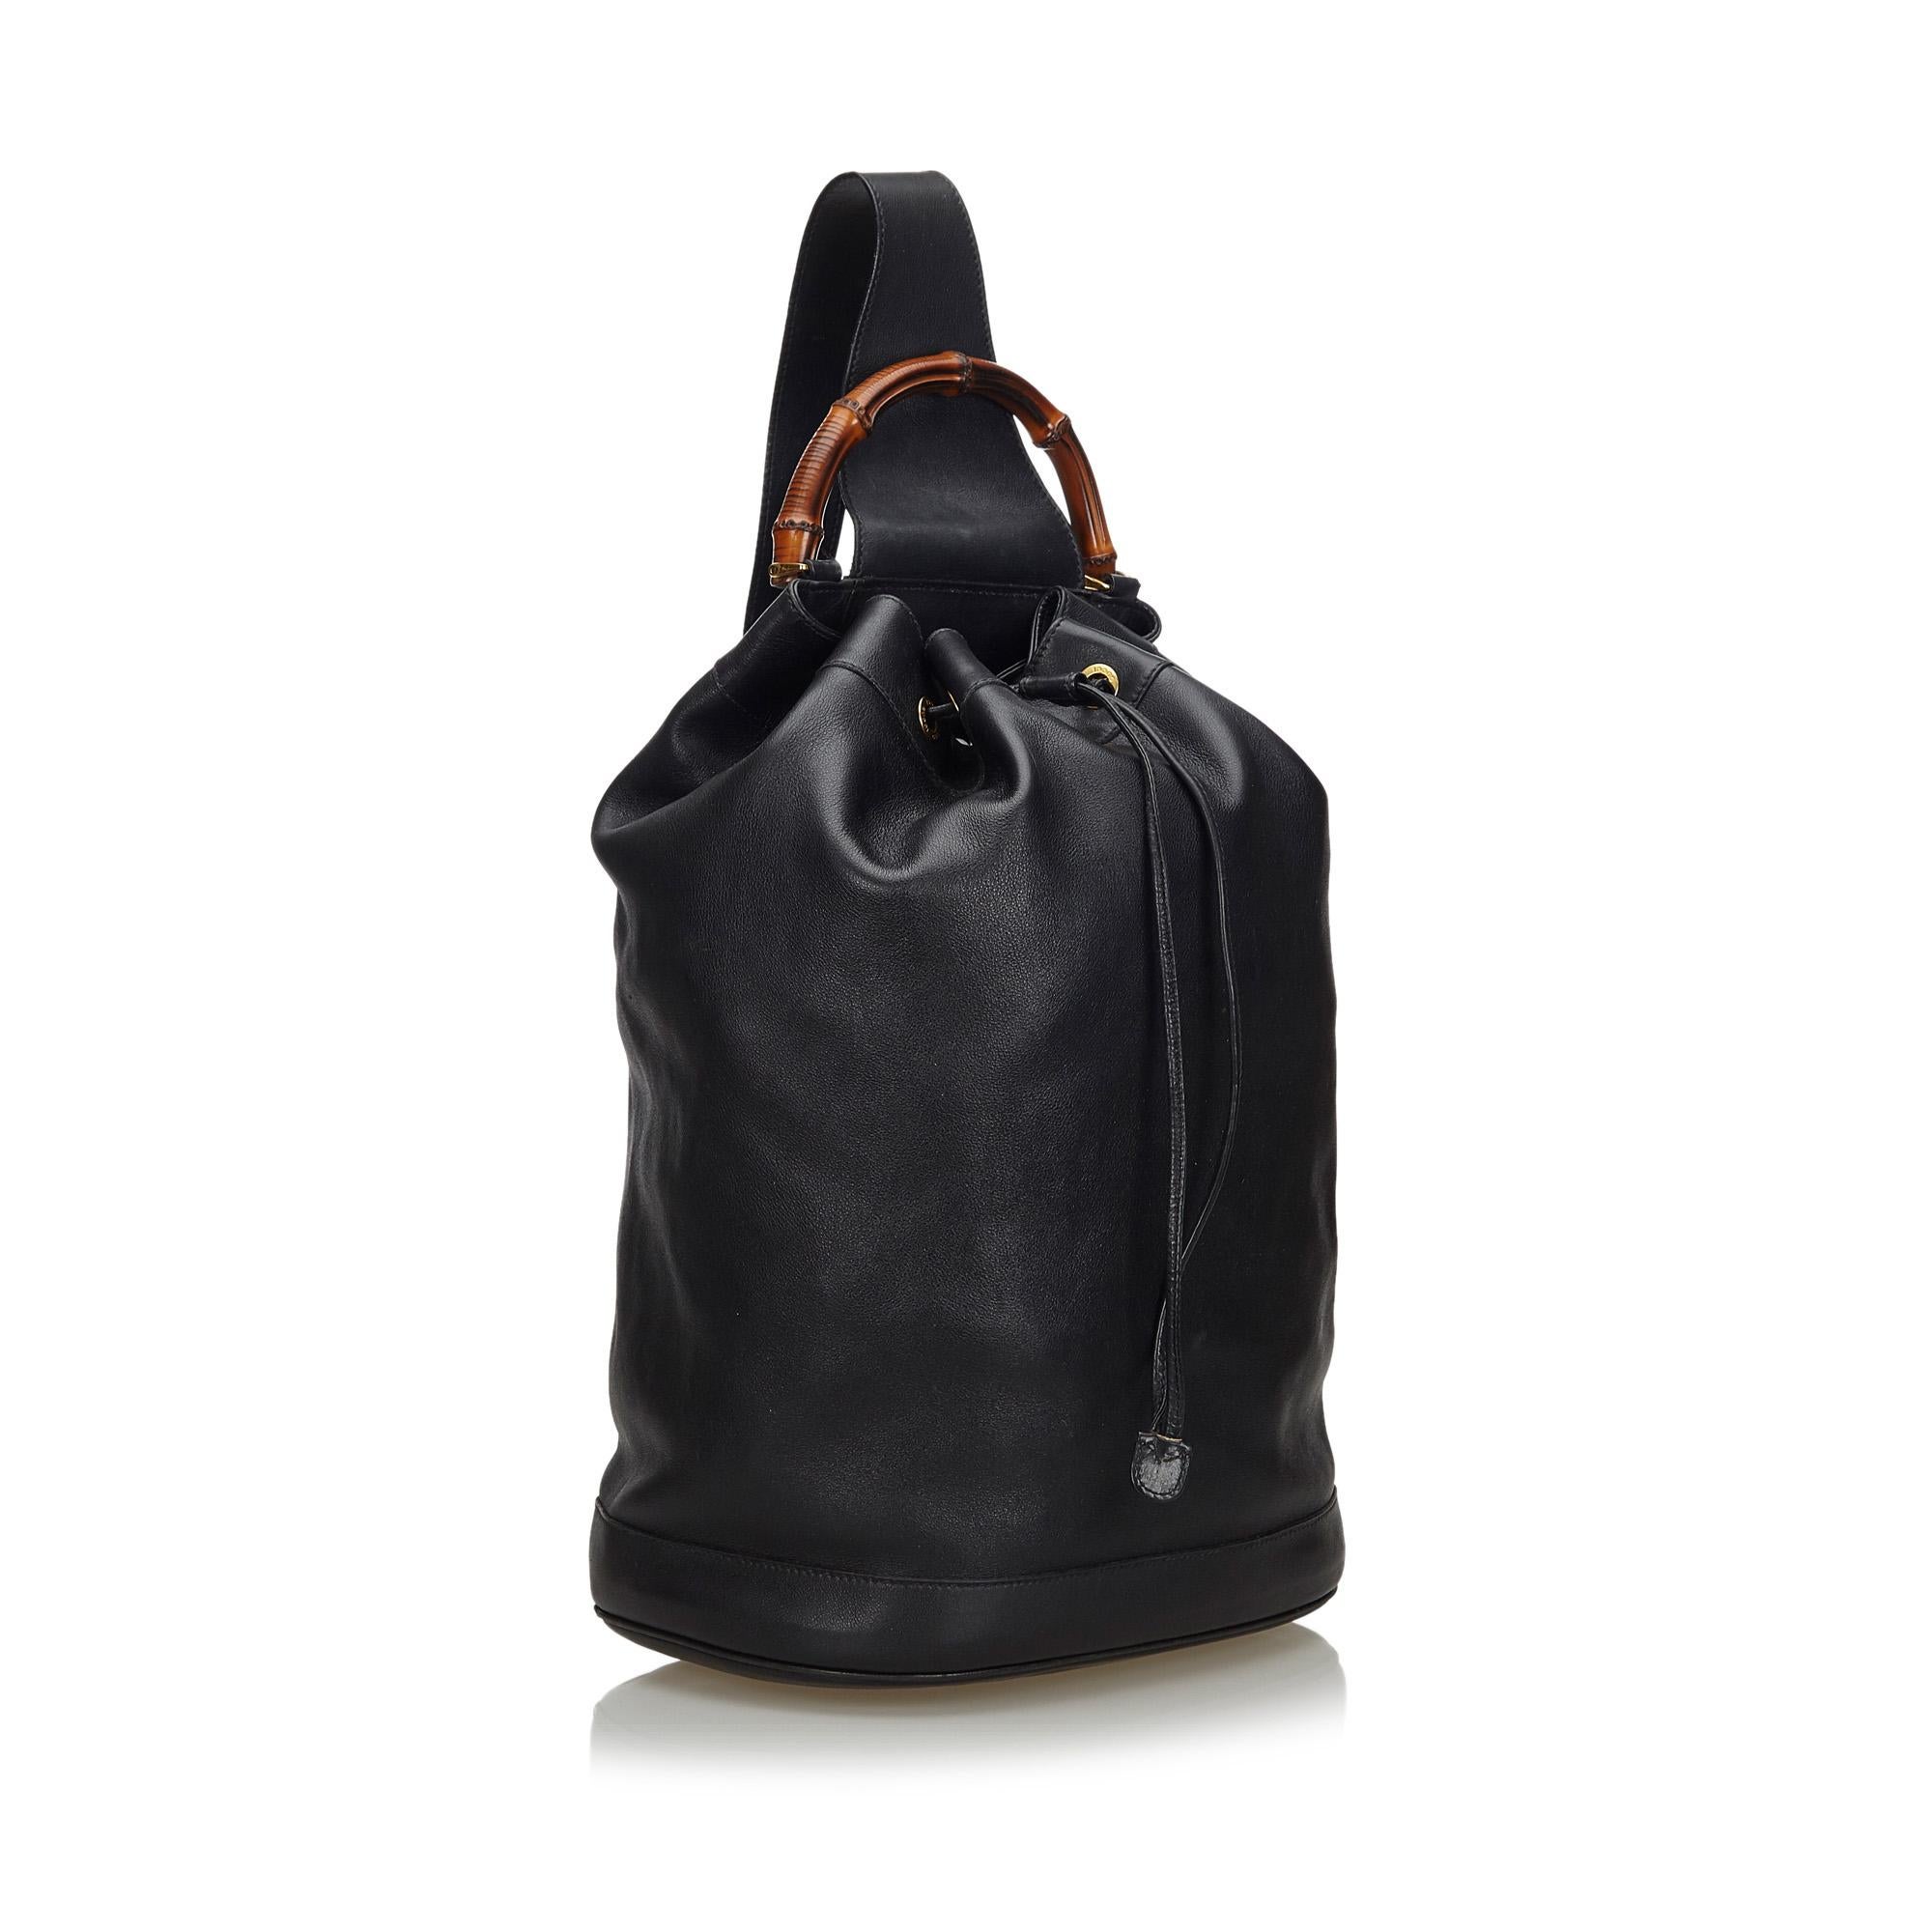 This backpack features a leather body, an adjustable flat strap, a bamboo top handle, a drawstring closure, and an interior zip pocket. It carries as B condition rating.

Inclusions: 
This item does not come with inclusions.

Dimensions:
Length: